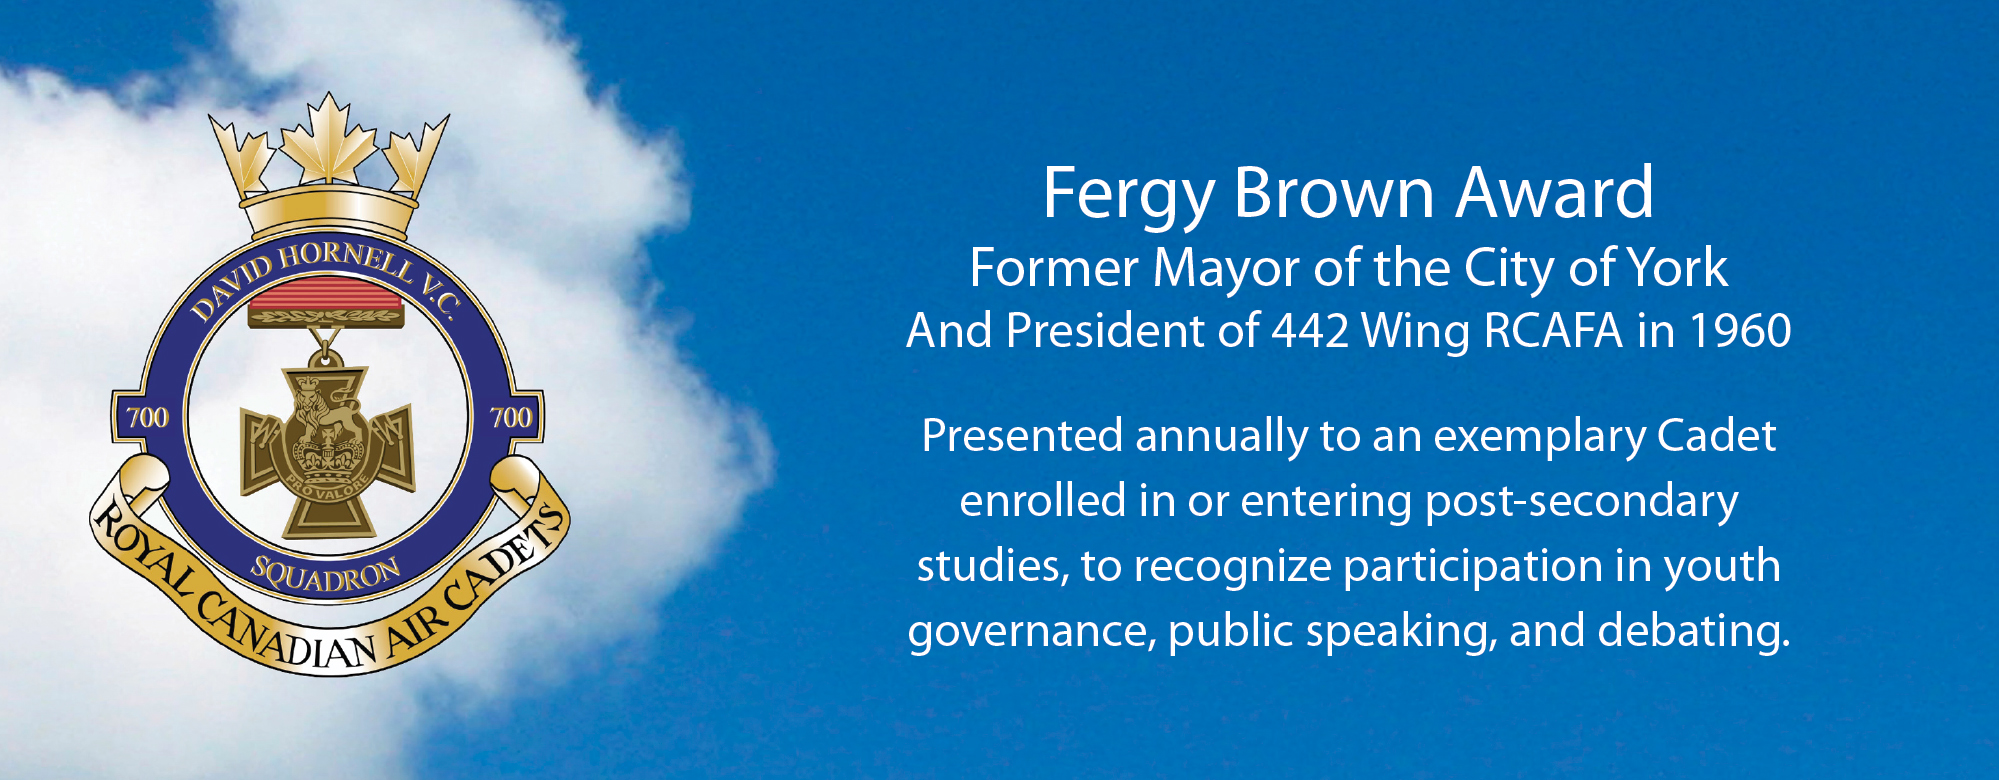 Fergy Brown Award Former Mayor of the City of York And President of 442 Wing RCAFA in 1960 Presented annually to an exemplary Cadet enrolled in or entering post-secondary studies, to recognize participation in youth governance, public speaking, and debating.